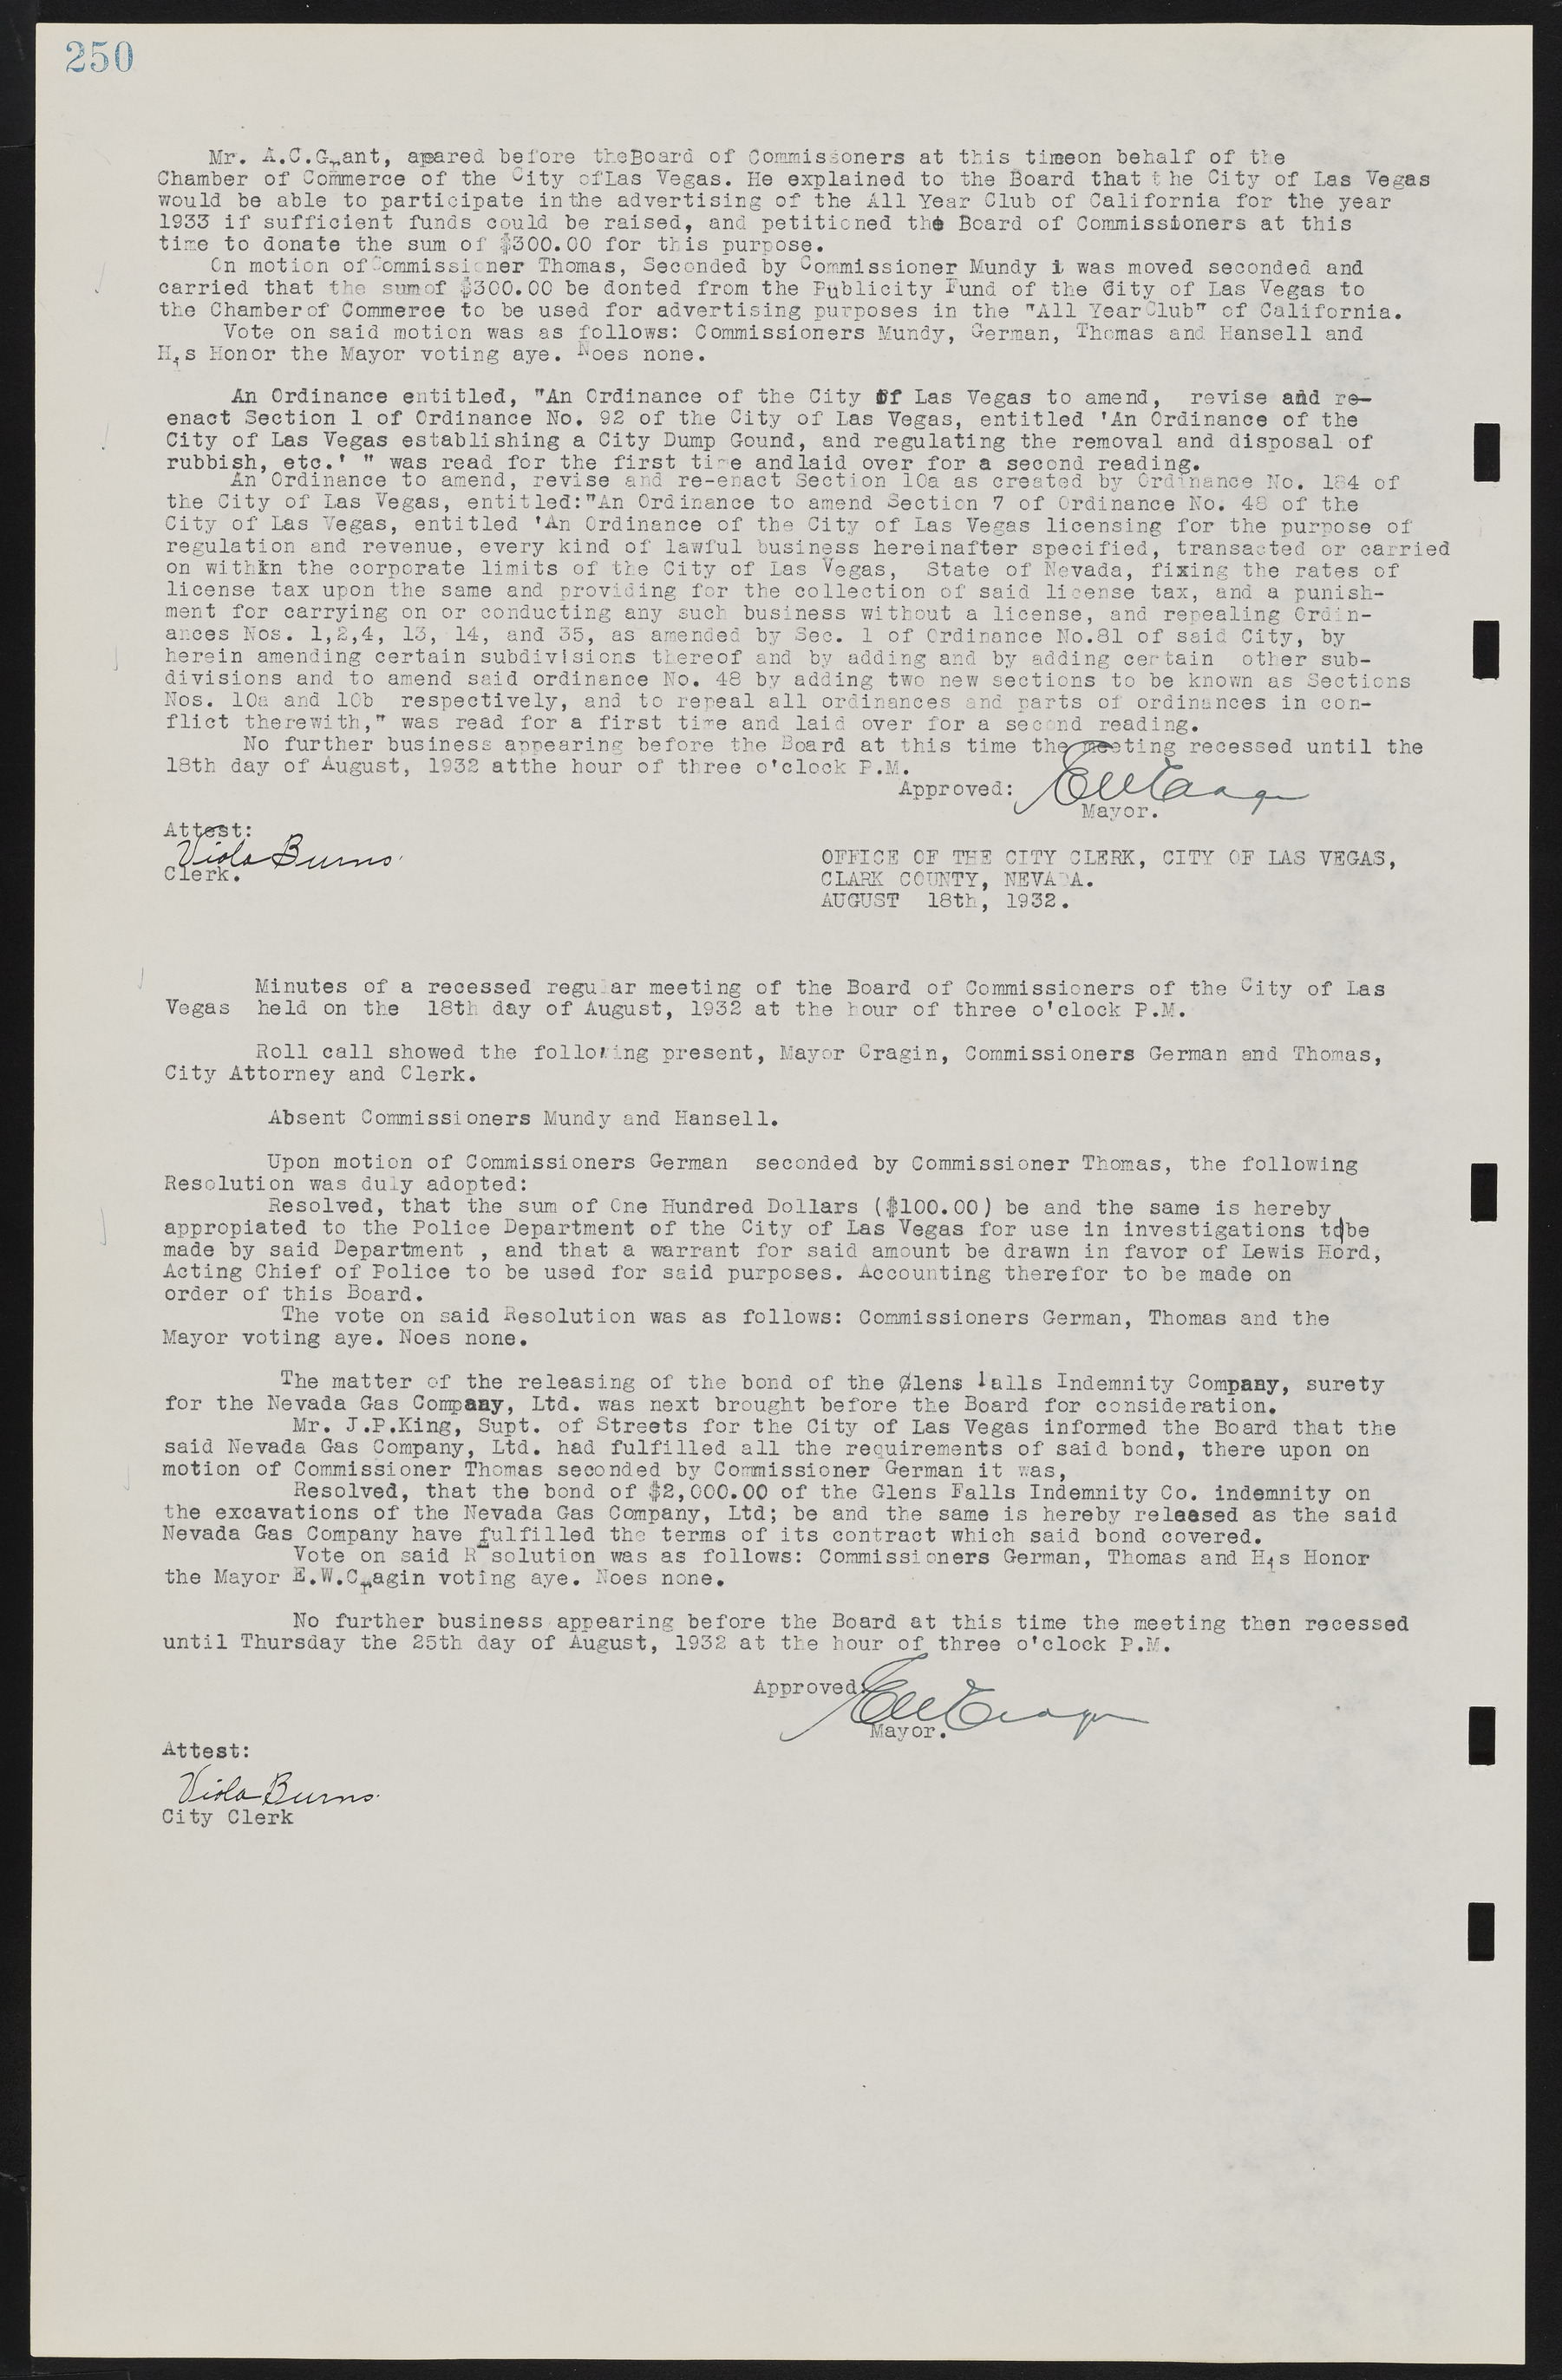 Las Vegas City Commission Minutes, May 14, 1929 to February 11, 1937, lvc000003-256